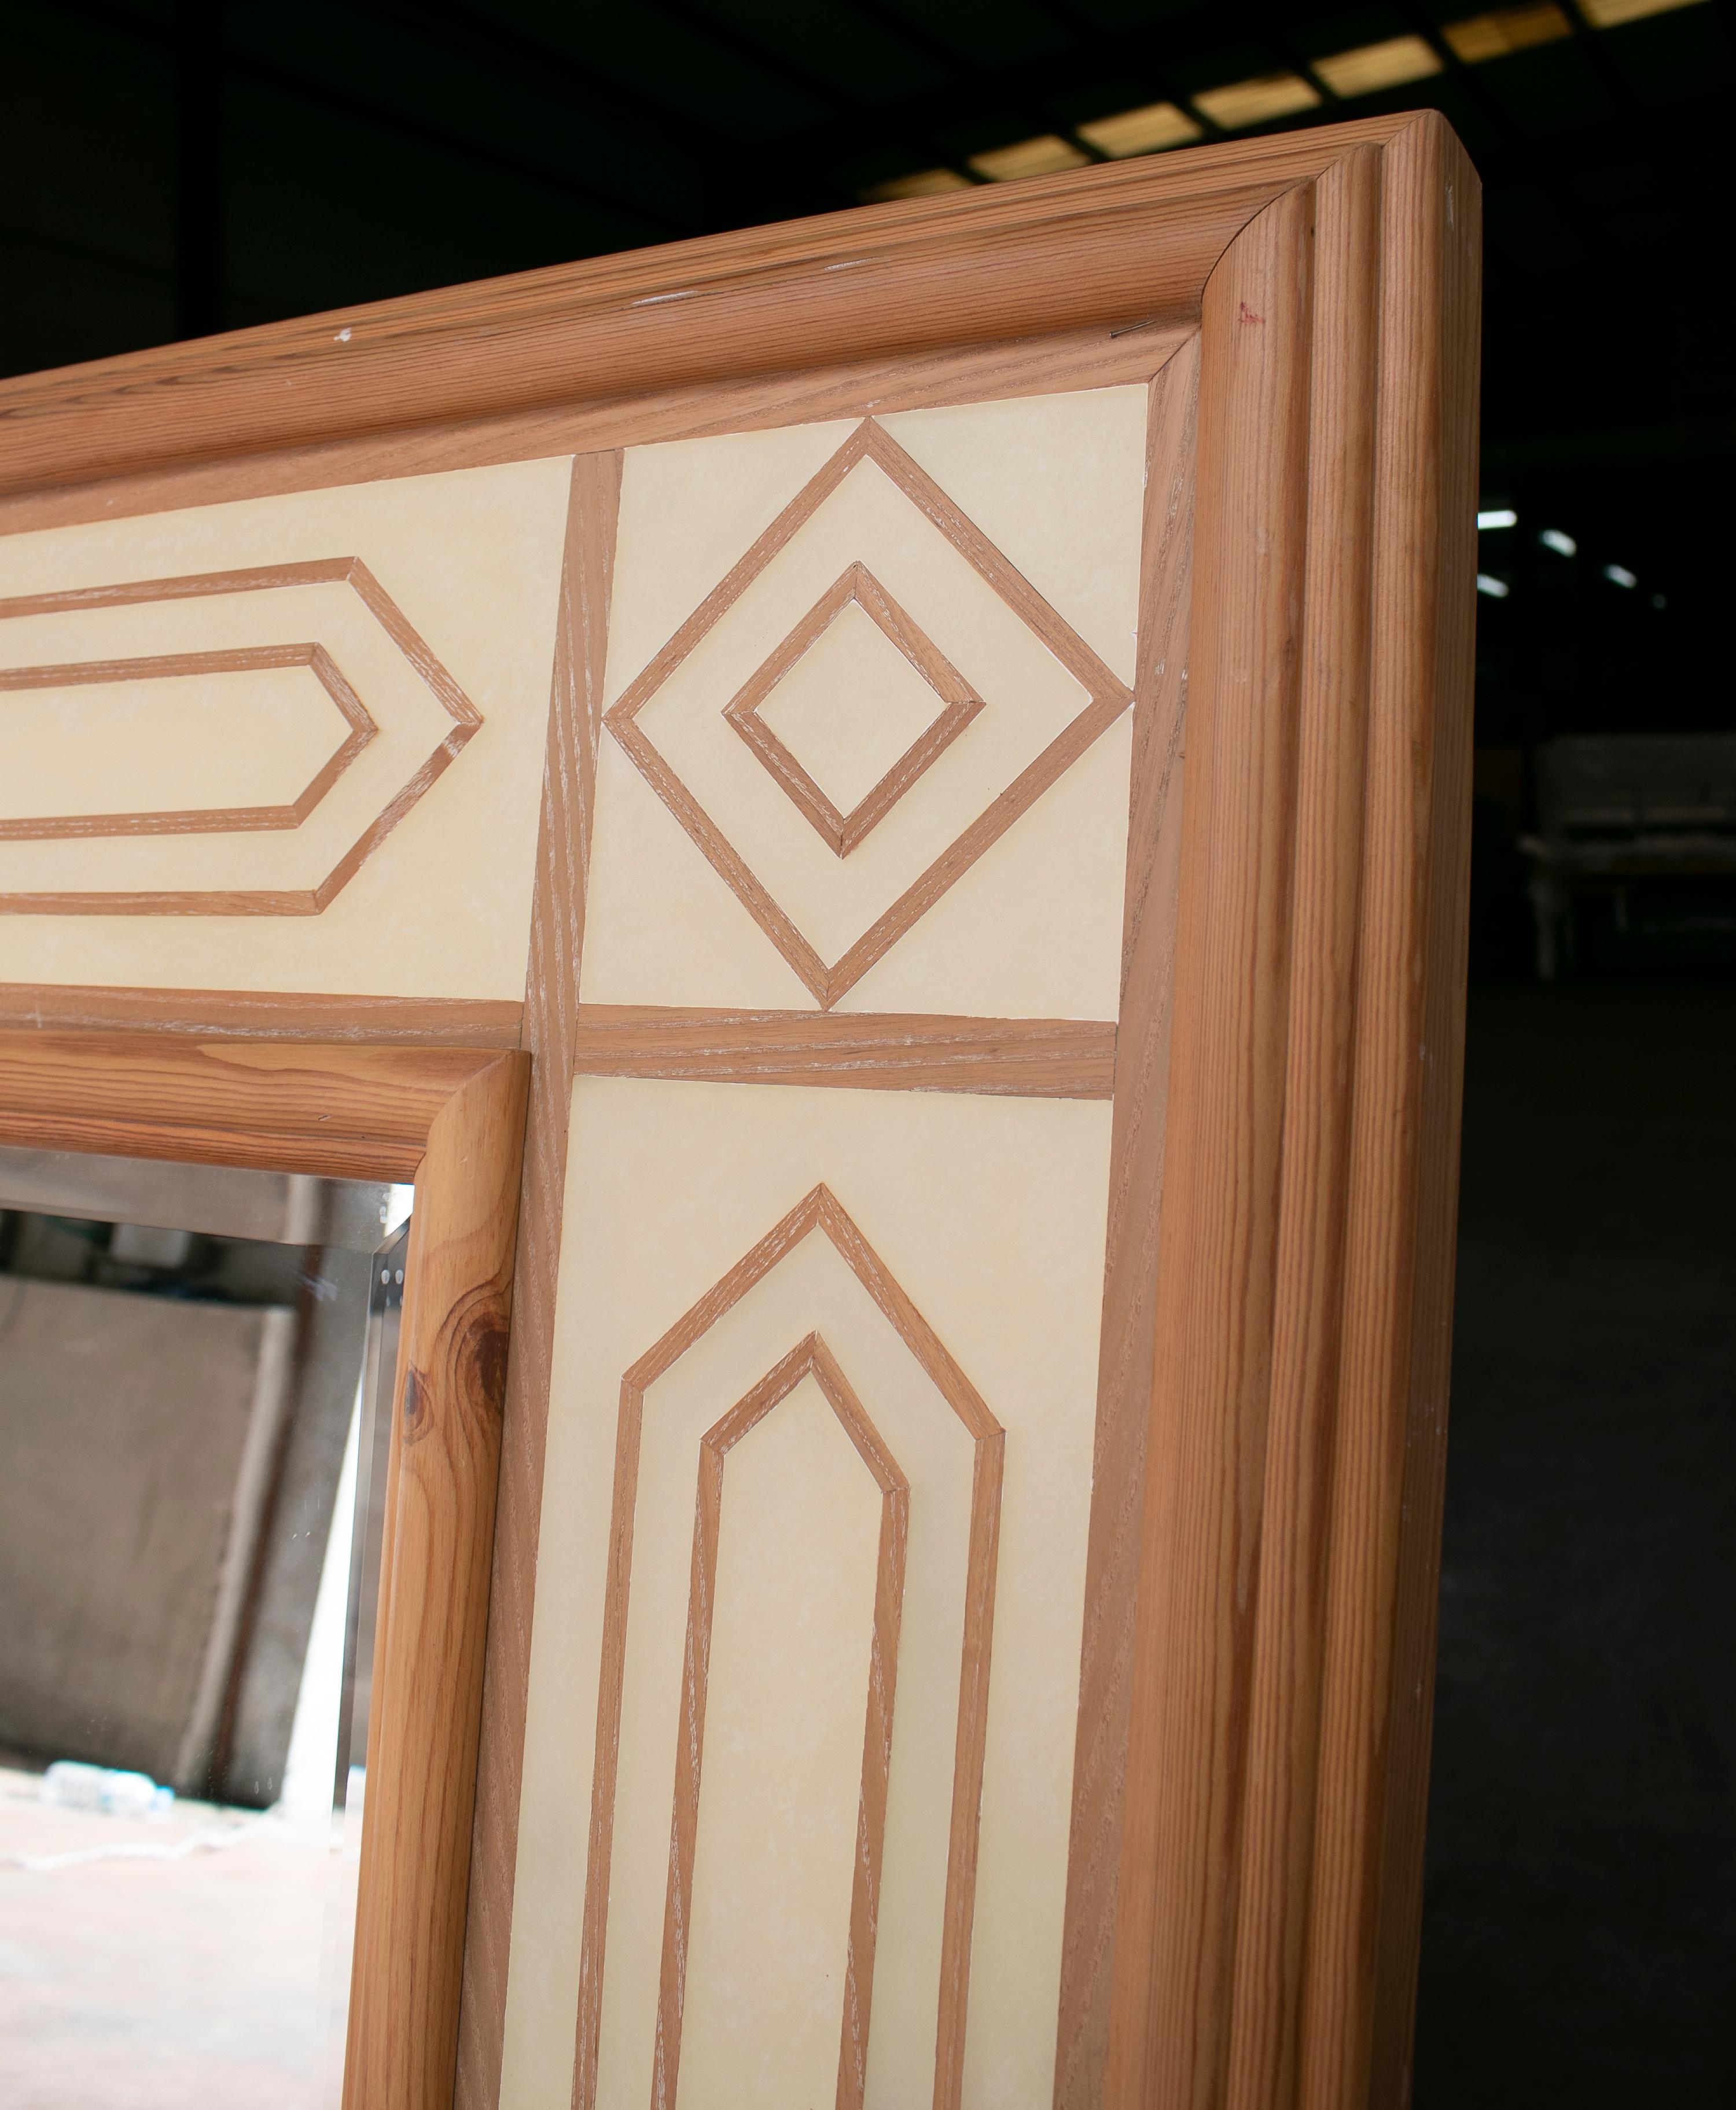 Vintage 1970s Spanish wooden mirror frame with geometric decoration.